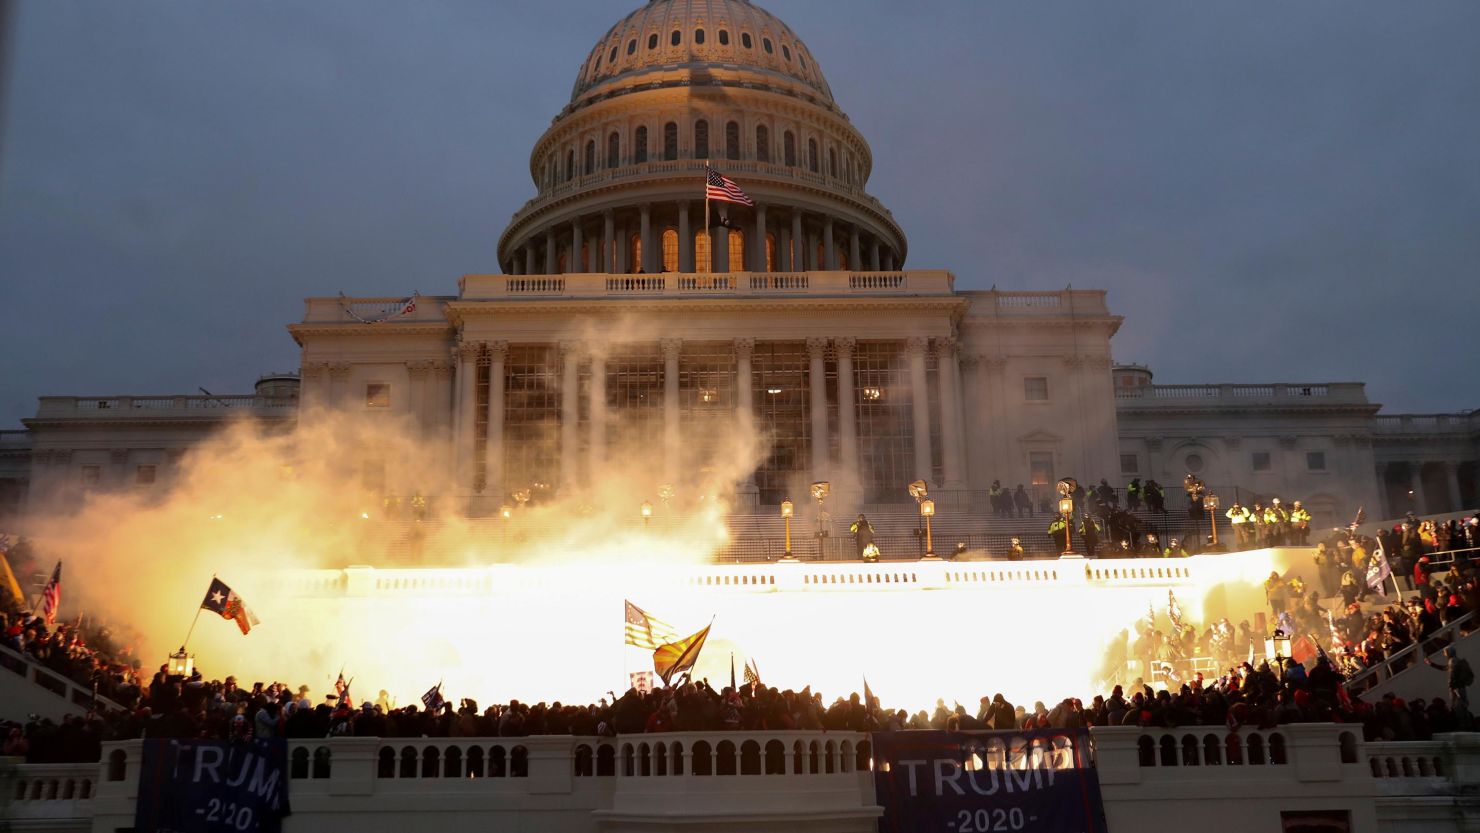 An explosion caused by a police munition is seen while supporters of President Donald Trump gather in front of the US Capitol in Washington on Wednesday, January 6.